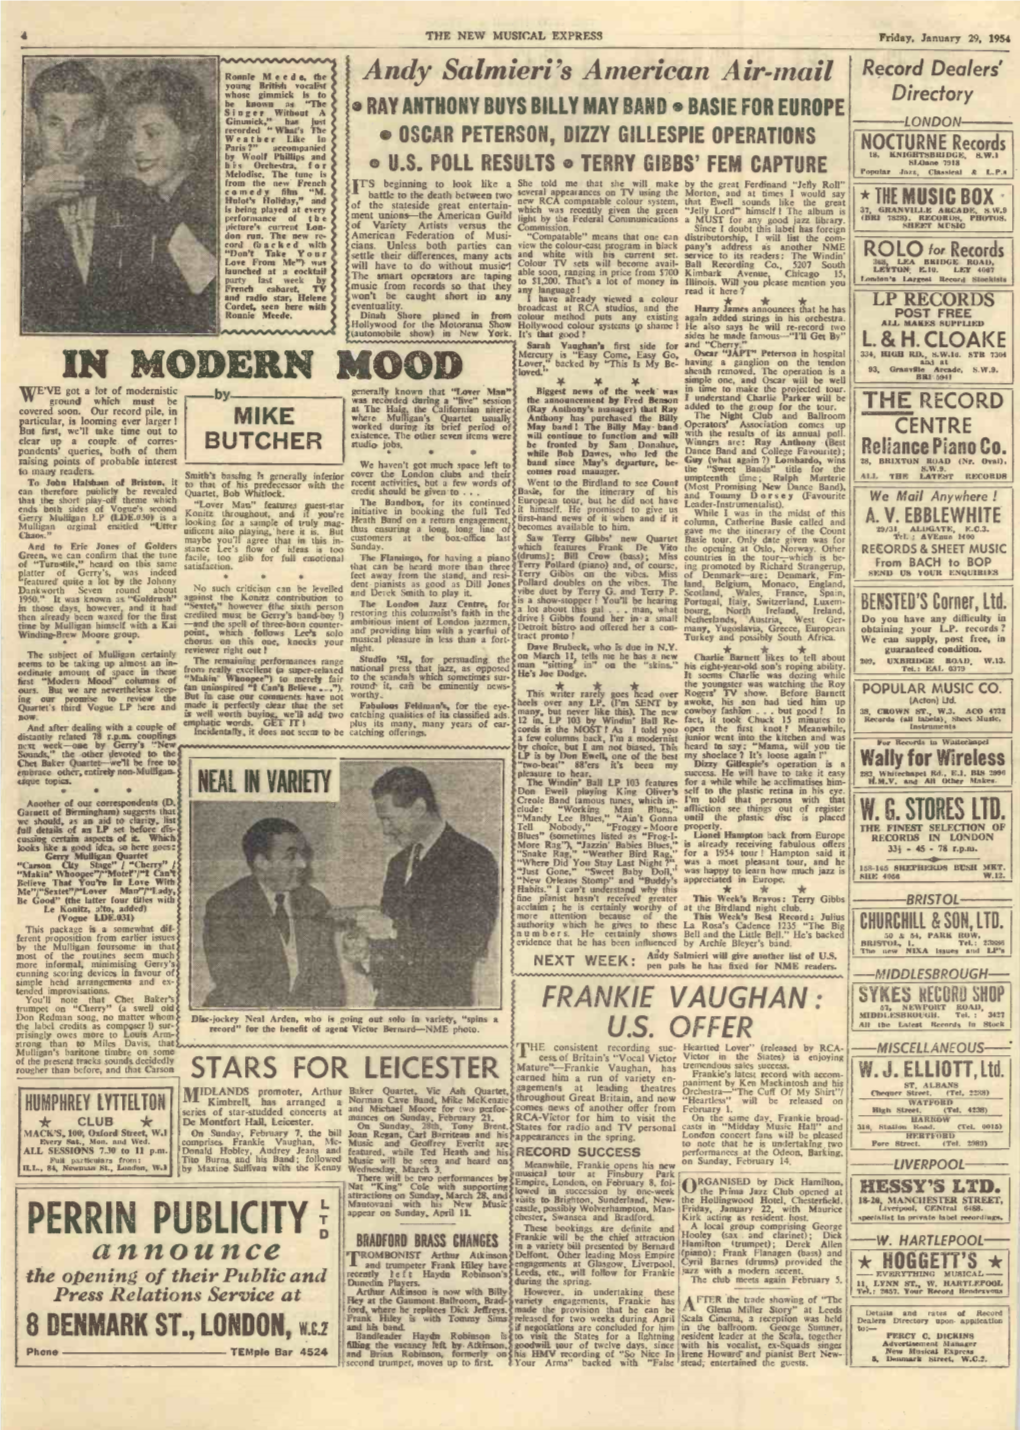 Nme-1954-01-29-S-Ocr